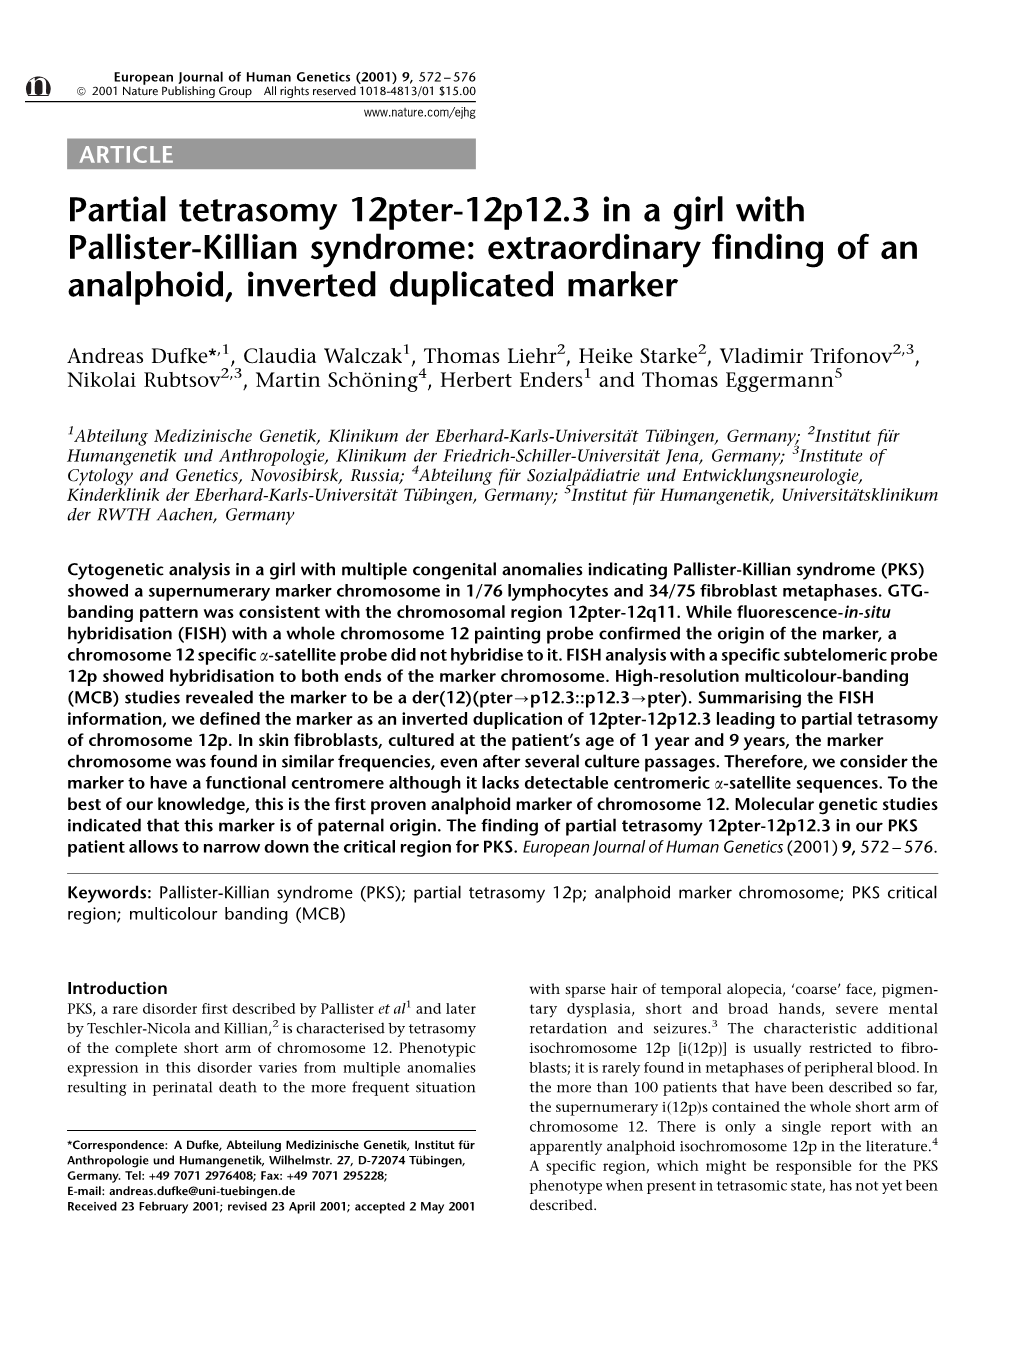 Partial Tetrasomy 12Pter-12P12.3 in a Girl with Pallister-Killian Syndrome: Extraordinary Finding of an Analphoid, Inverted Duplicated Marker